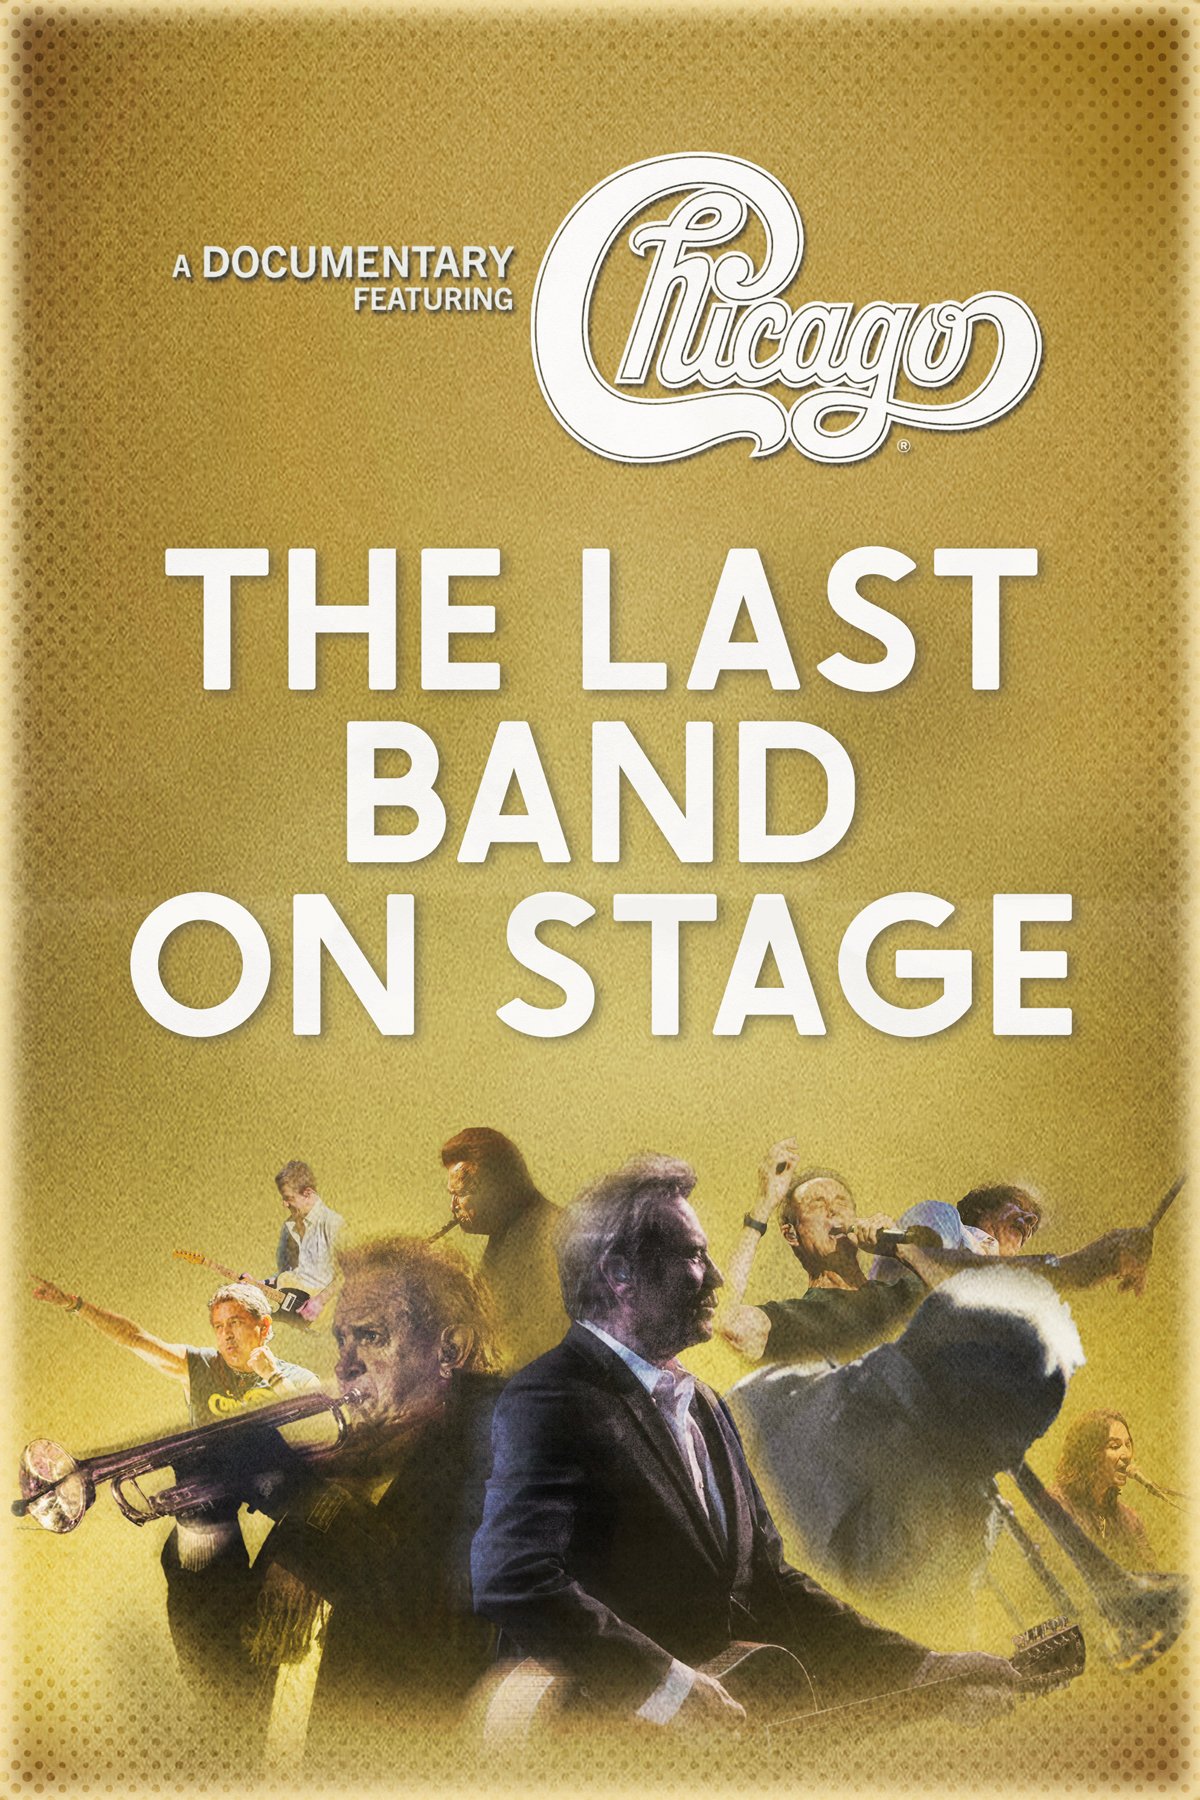 TheLastBandOnStage Poster